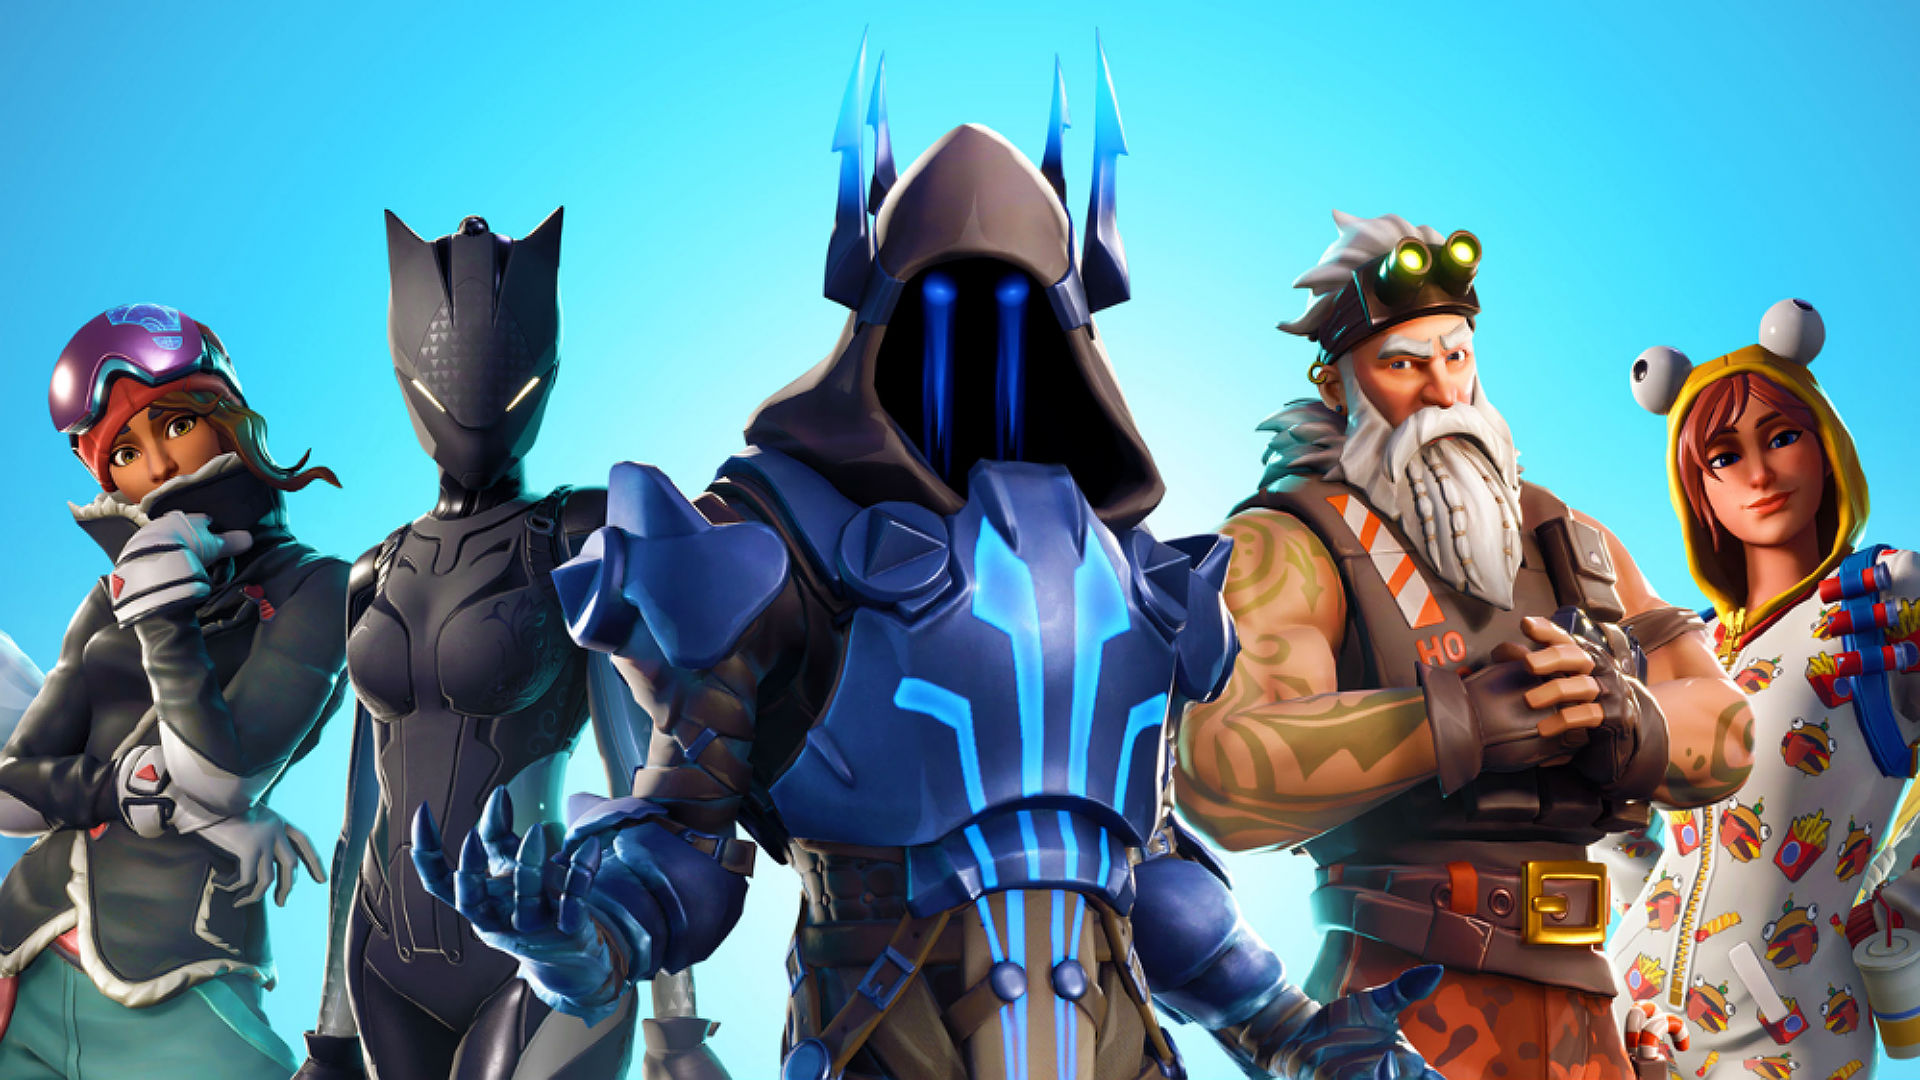 Best Fortnite Skins Ranked The Finest From The Fortnite Item Shop - best fortnite skins ranked the finest from the fortnite item shop